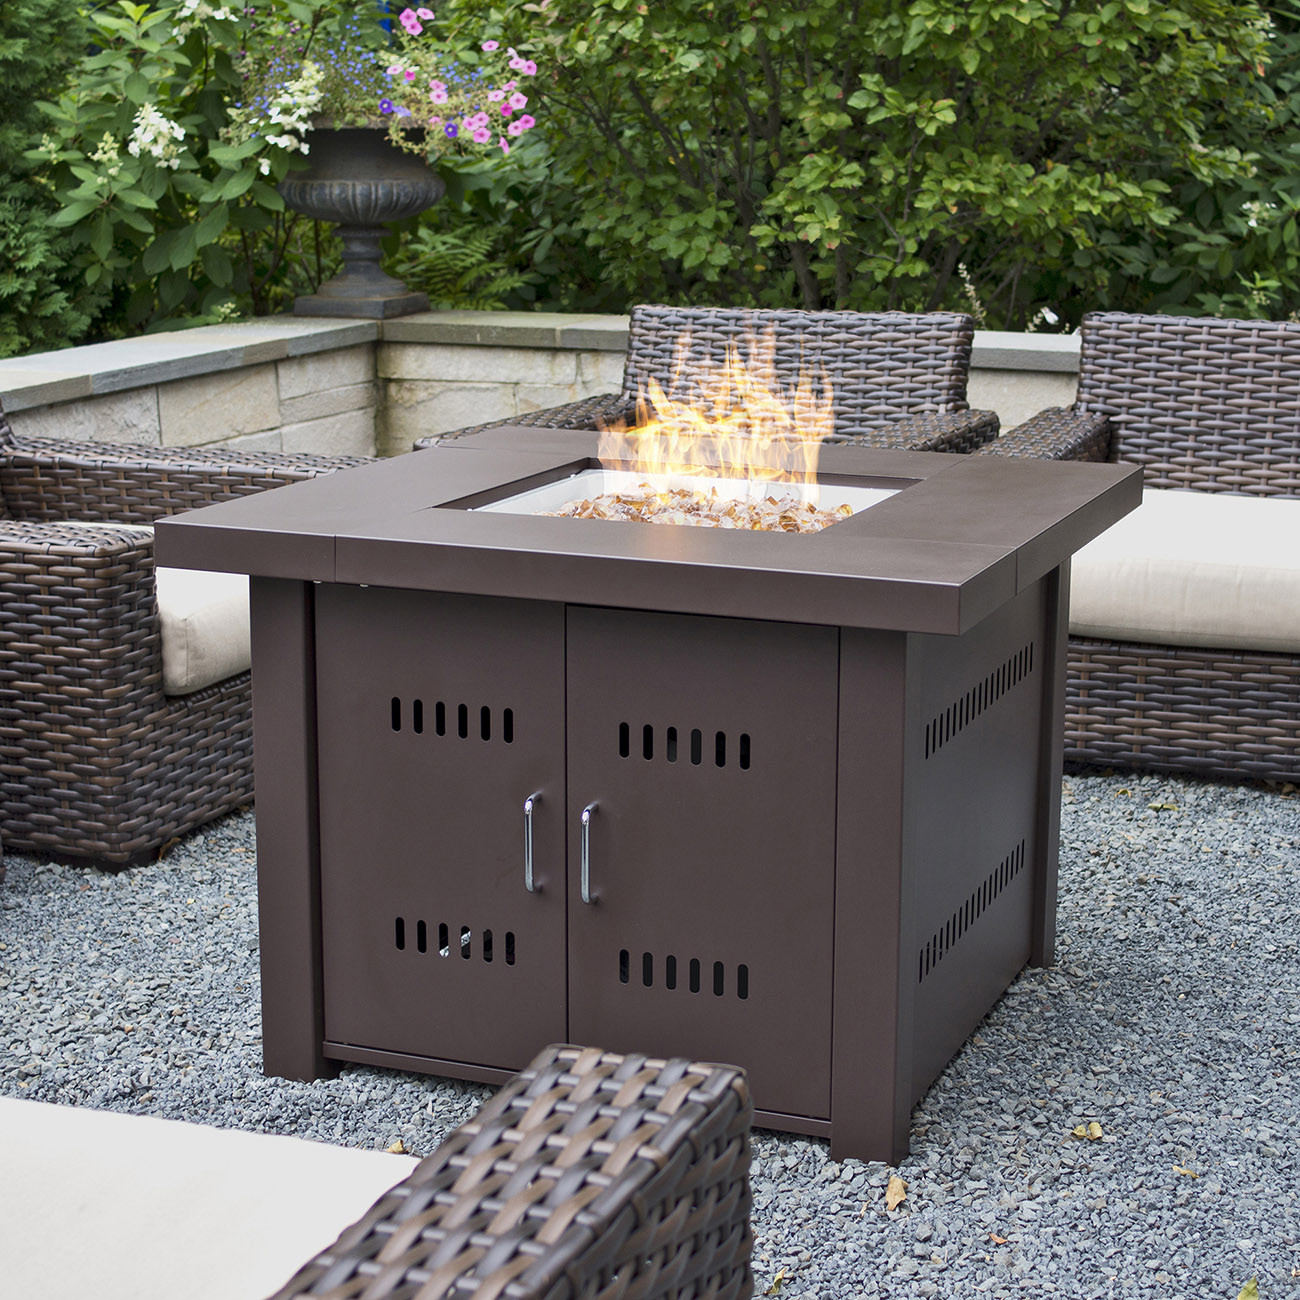 Propane Deck Fire Pit
 NEW Outdoor Fire Pit Square Table Firepit Propane Gas Fire